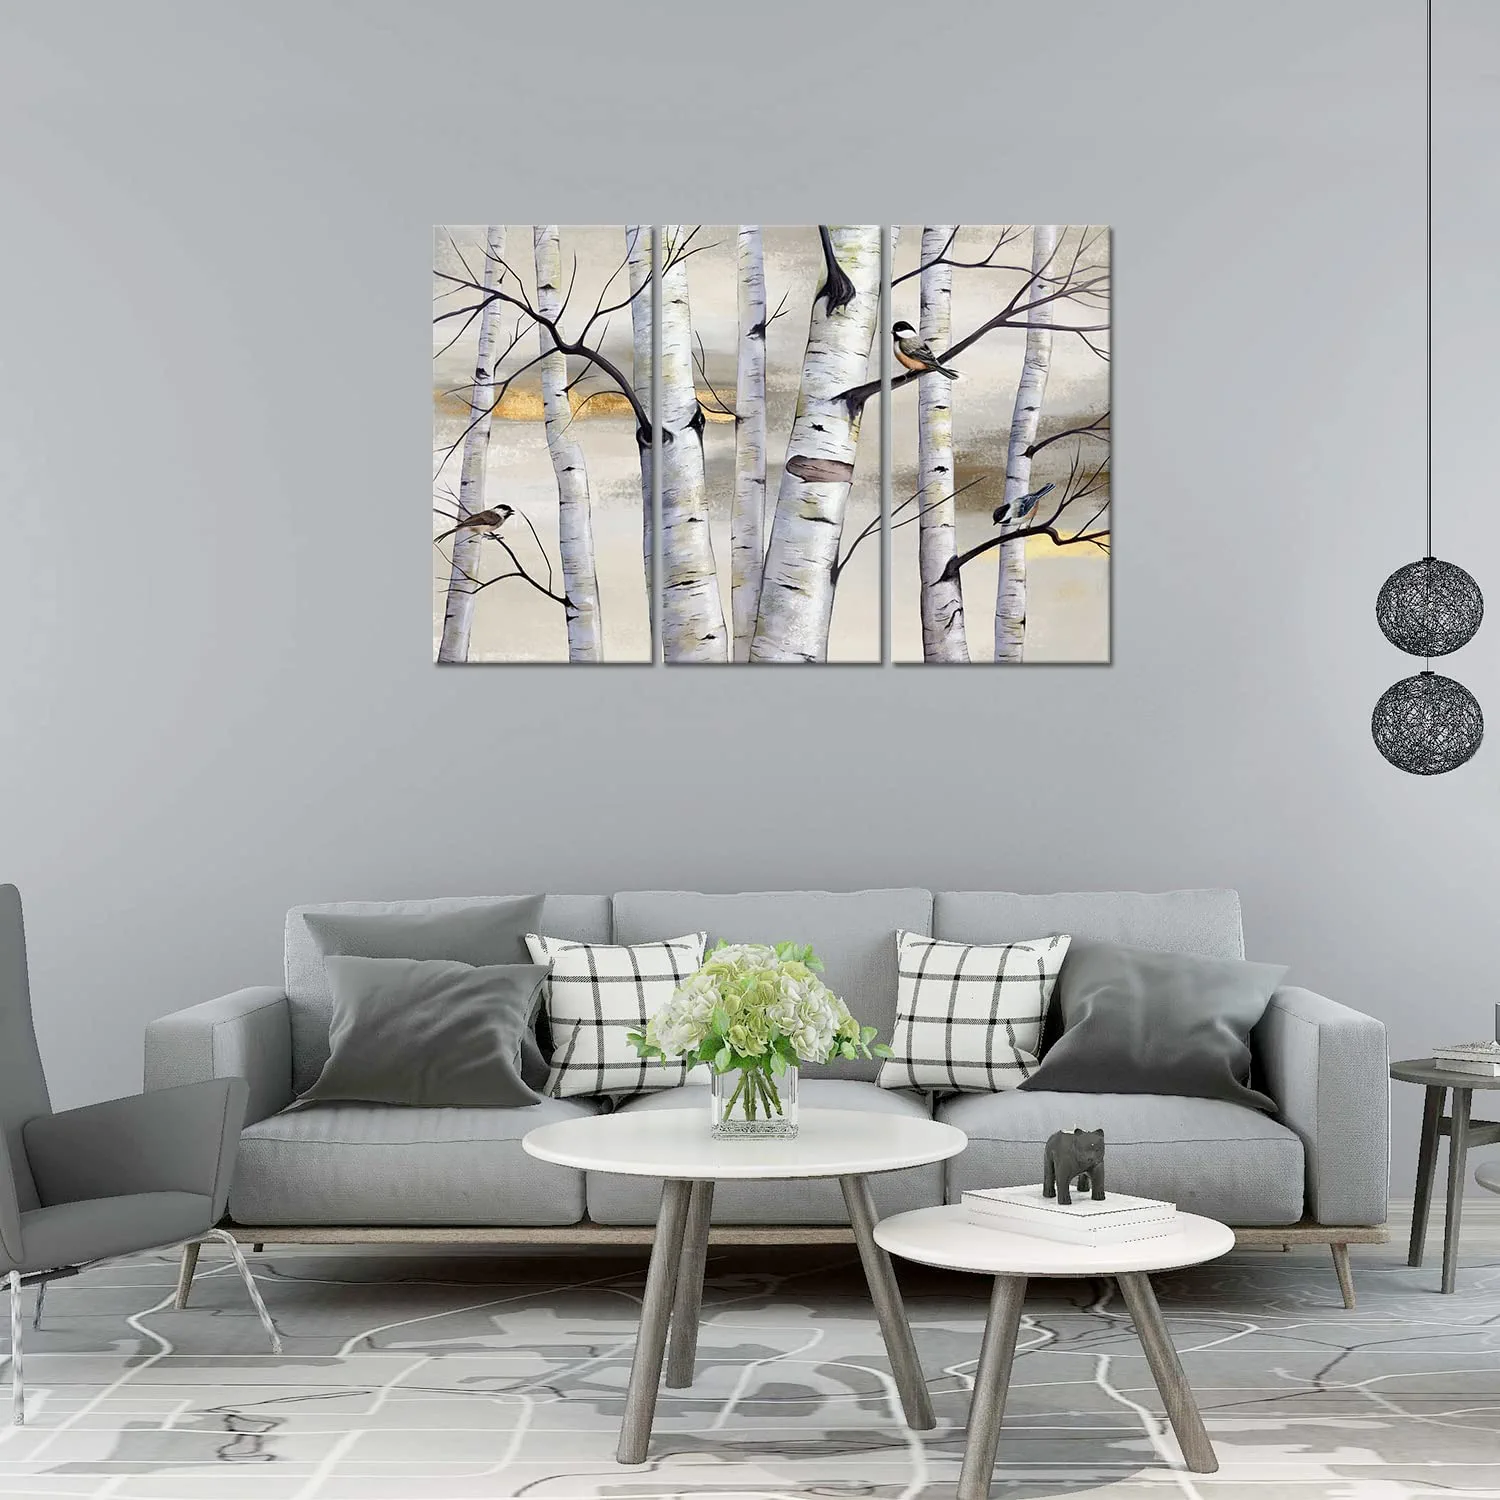 Nature Scenery Wall Art Landscape Picture for Living Room